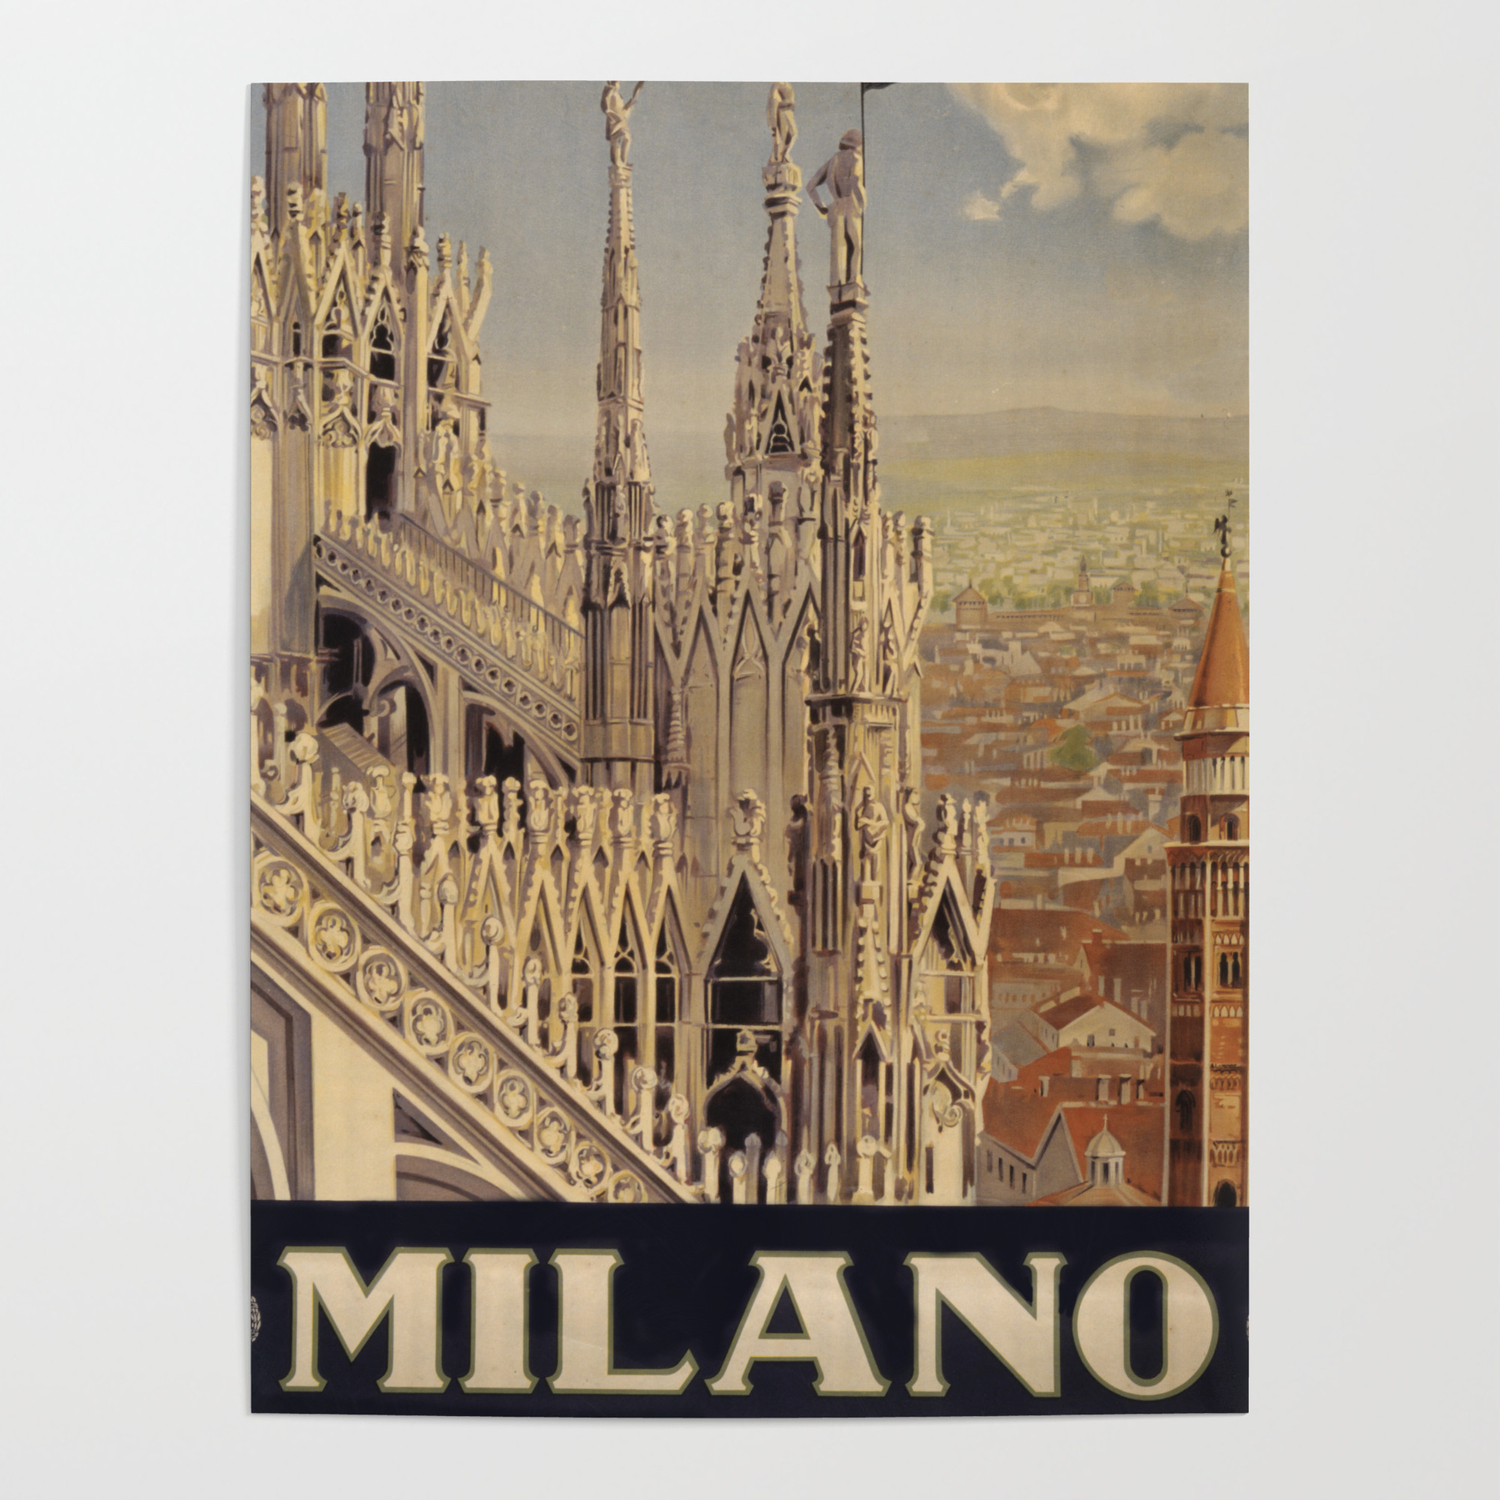 VINTAGE TRAVEL MILANO MILAN ITALY NEW ART PRINT POSTER PICTURE CC5565